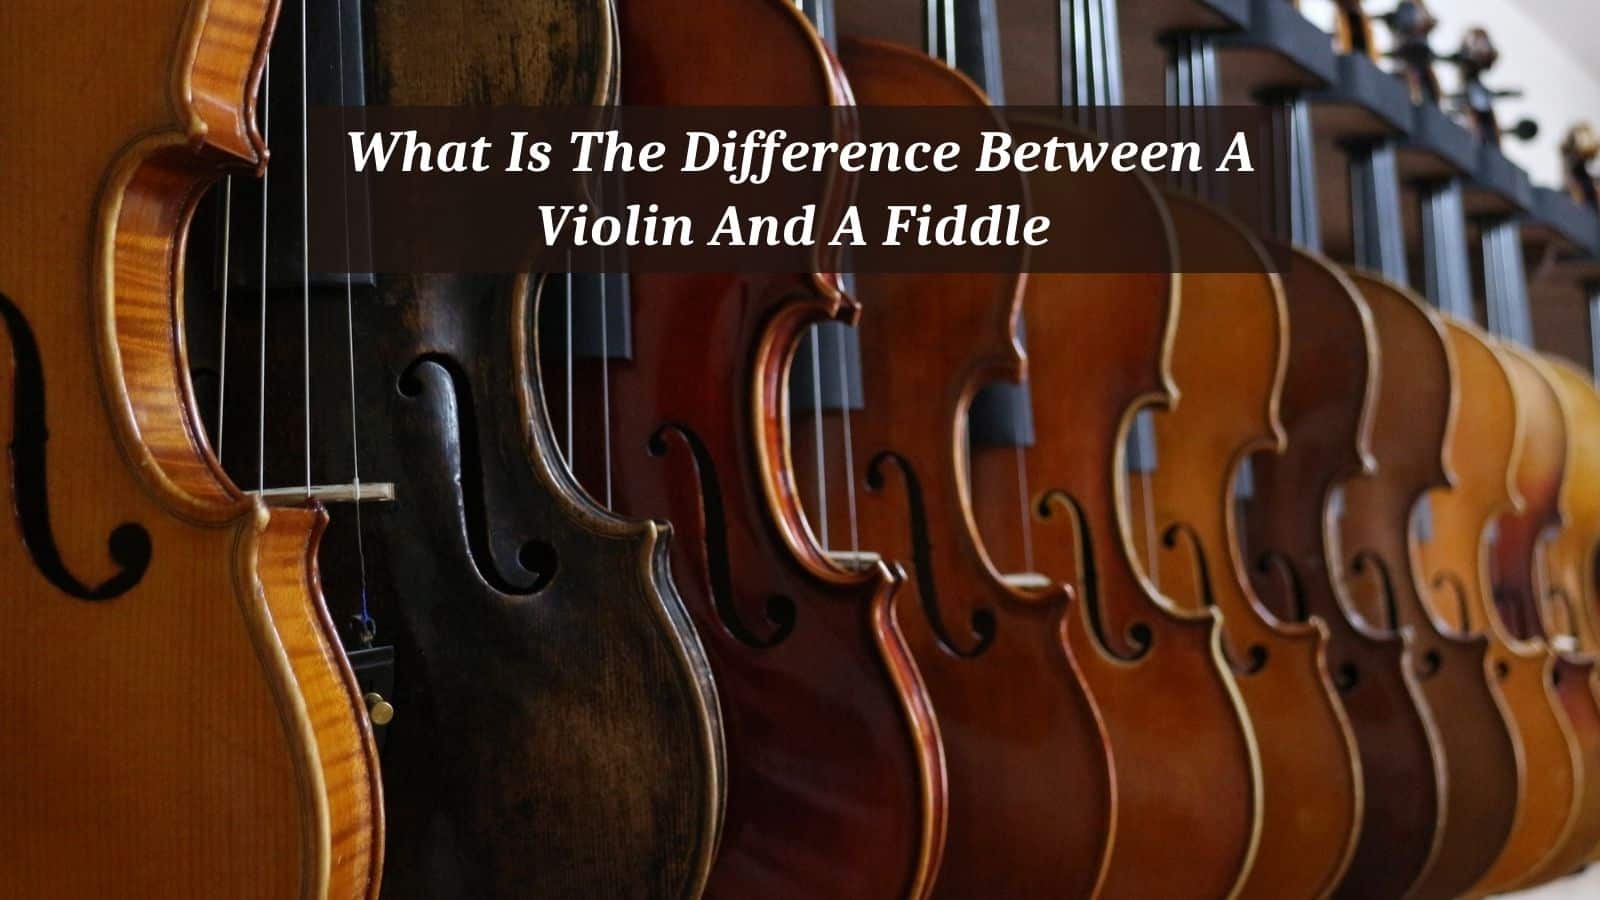 What Is The Difference Between A Violin And A Fiddle